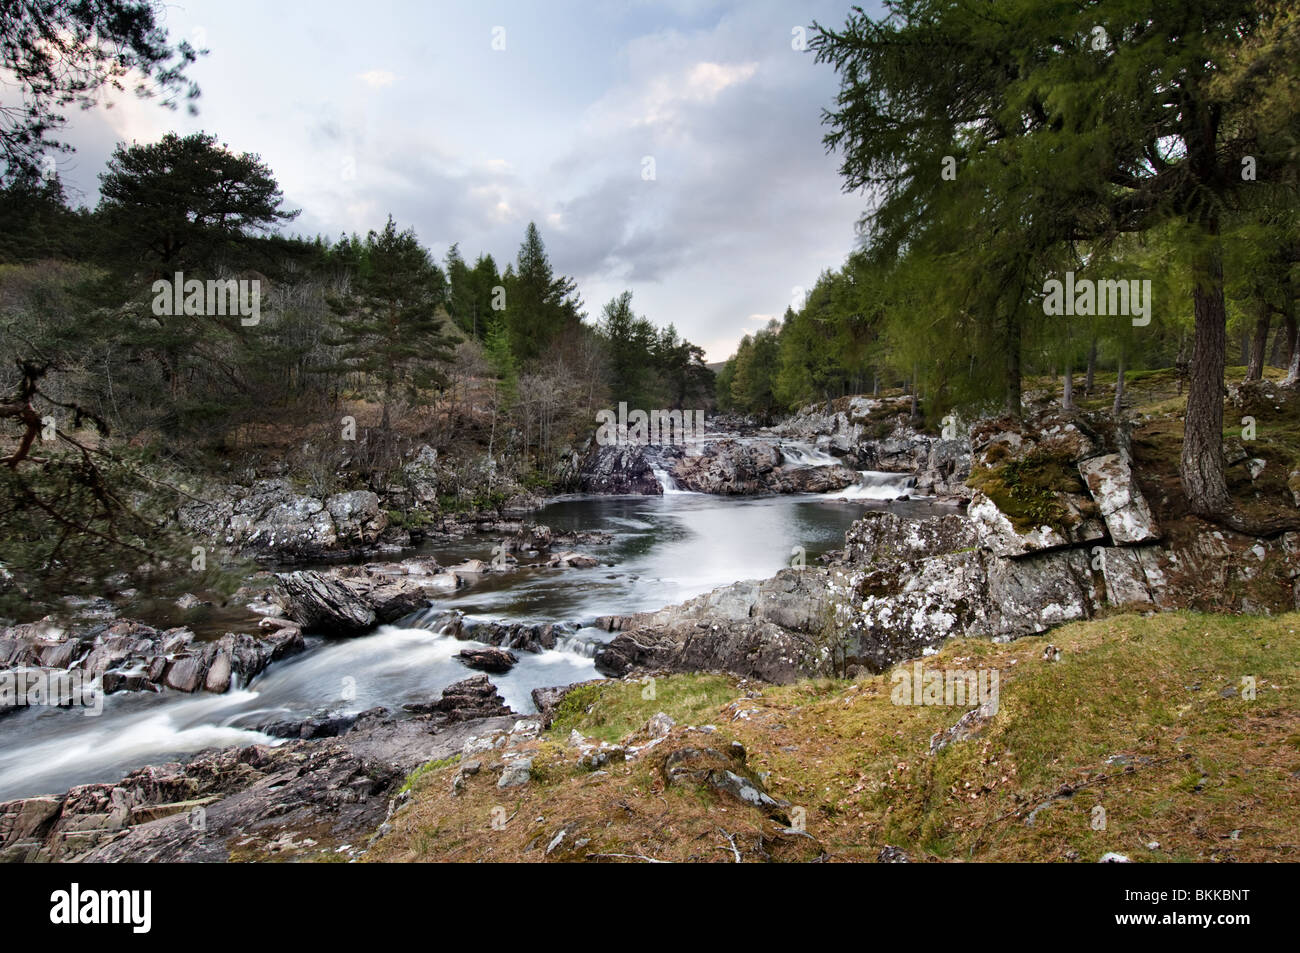 The beautiful Achness Falls at low spate taken at Glen Cassley, Sutherland in Scotland early evening Stock Photo